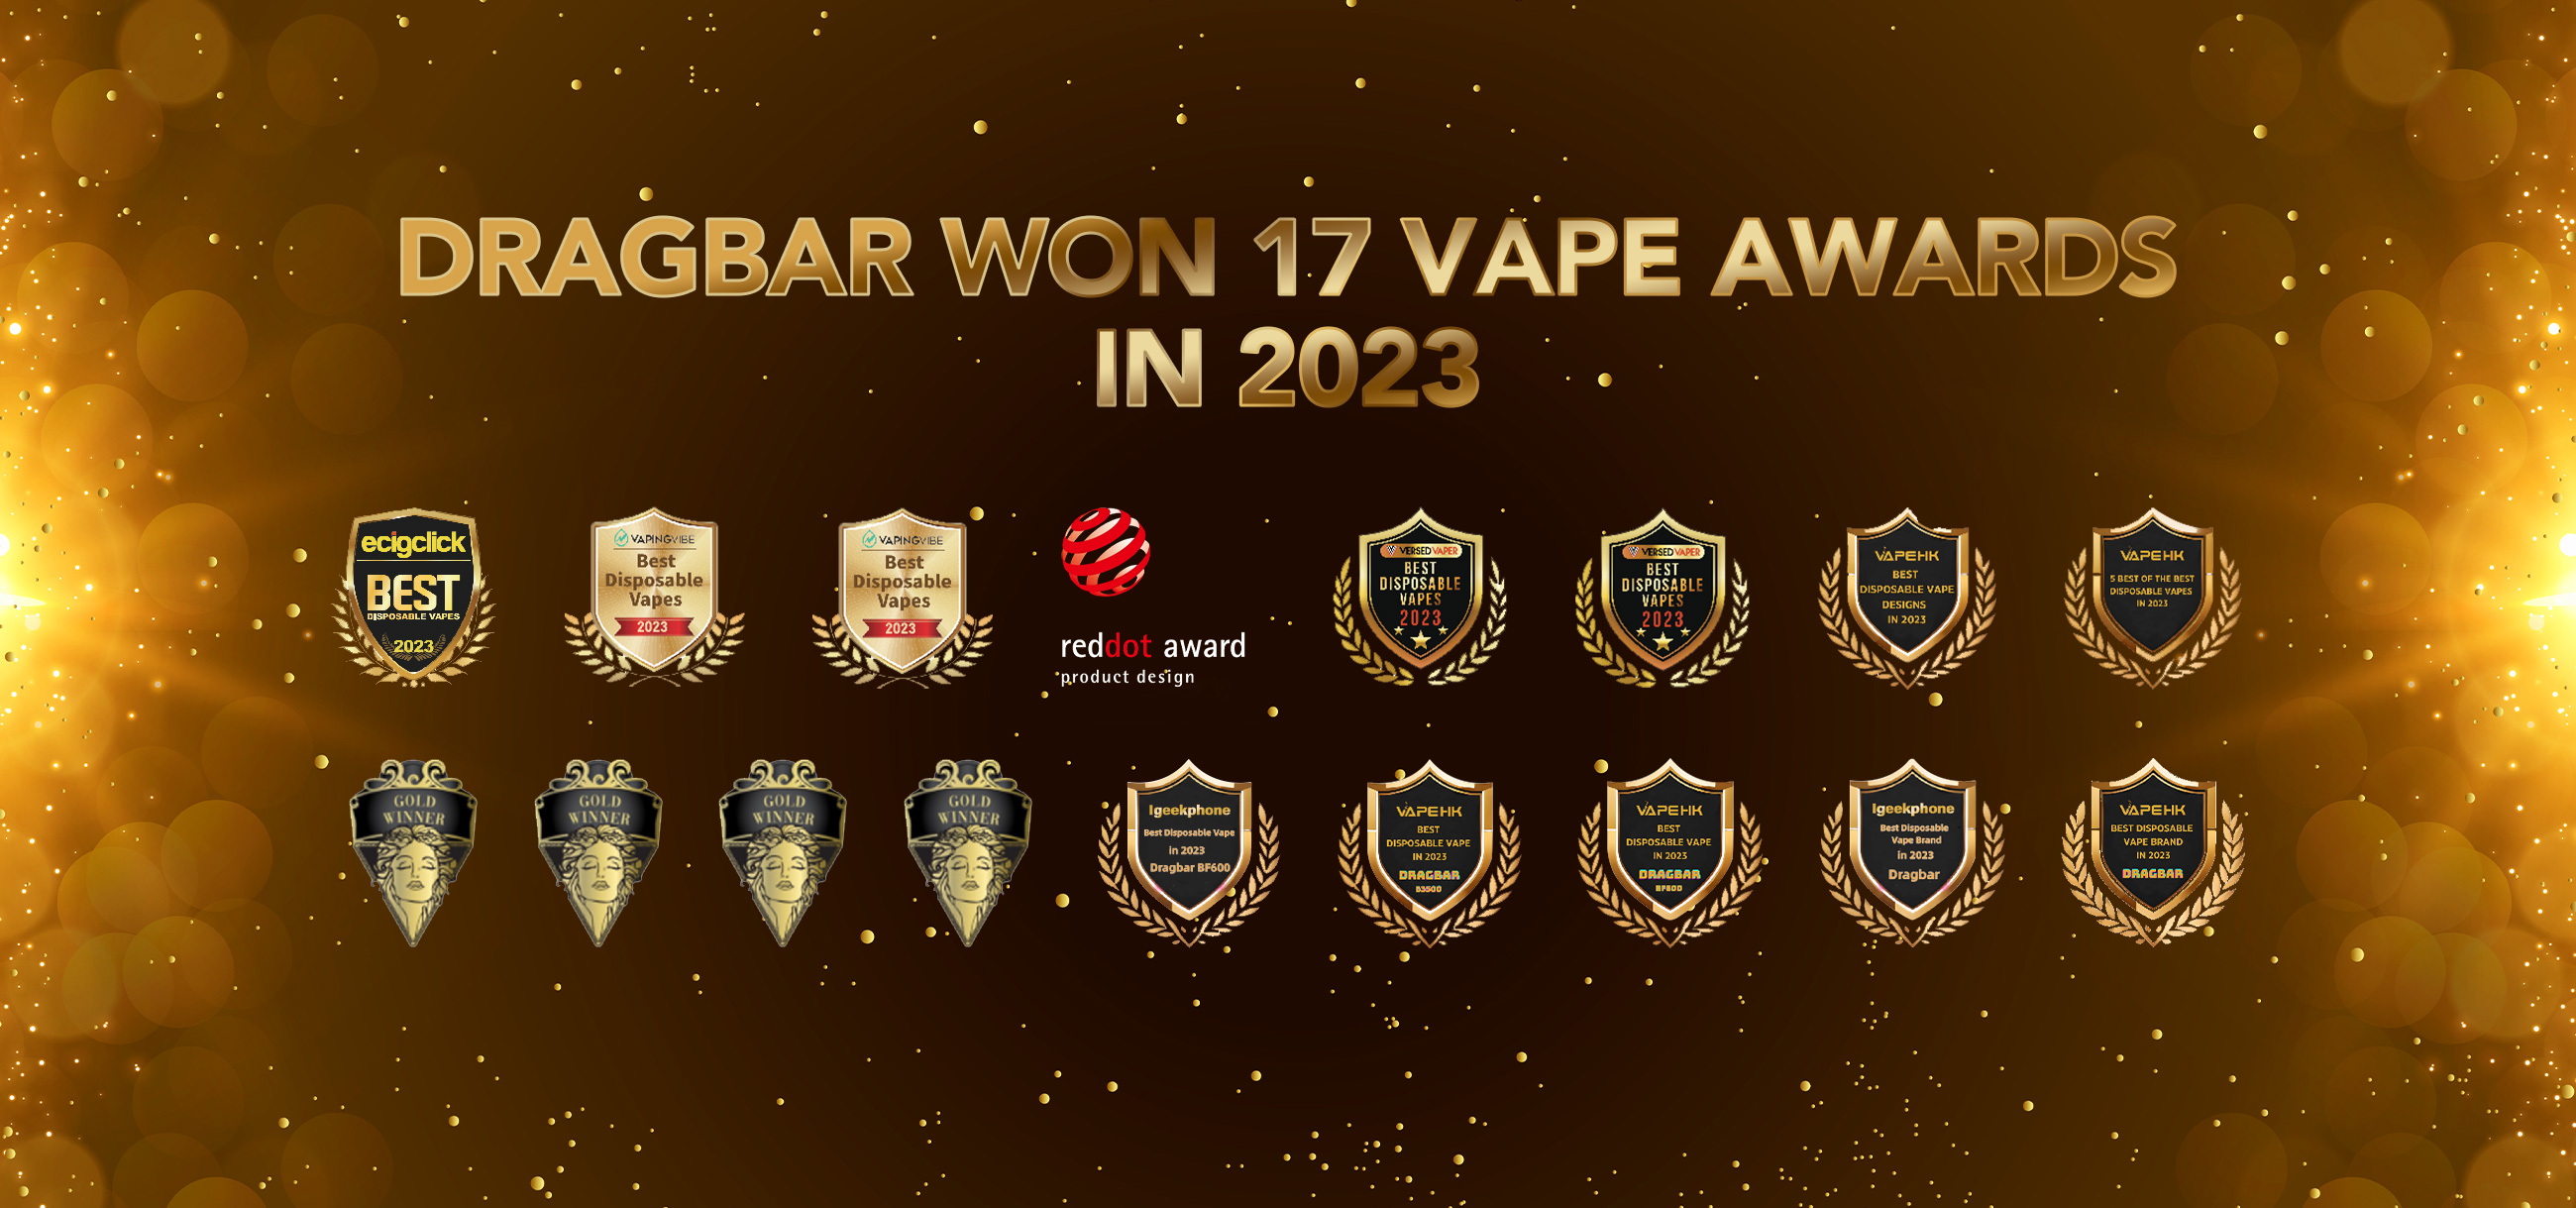 Heading to be a pioneer, DRAGBAR has won 17 vape awards in 2023!插图